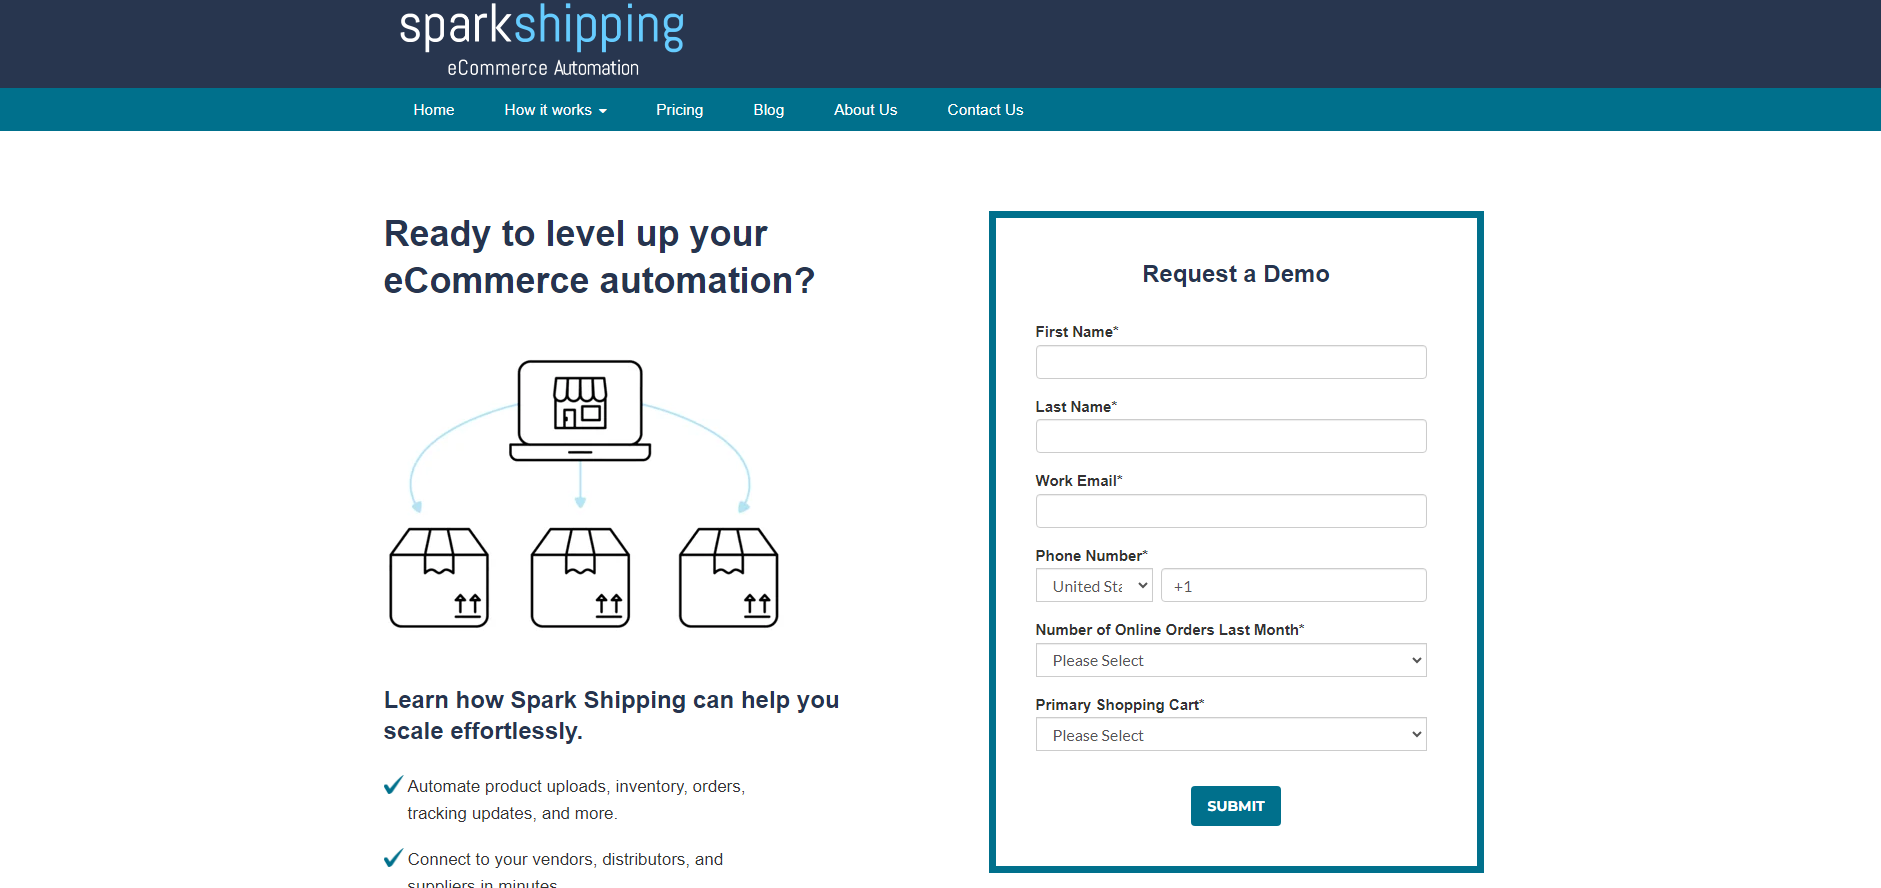 Spark Shipping eCommerce Automation